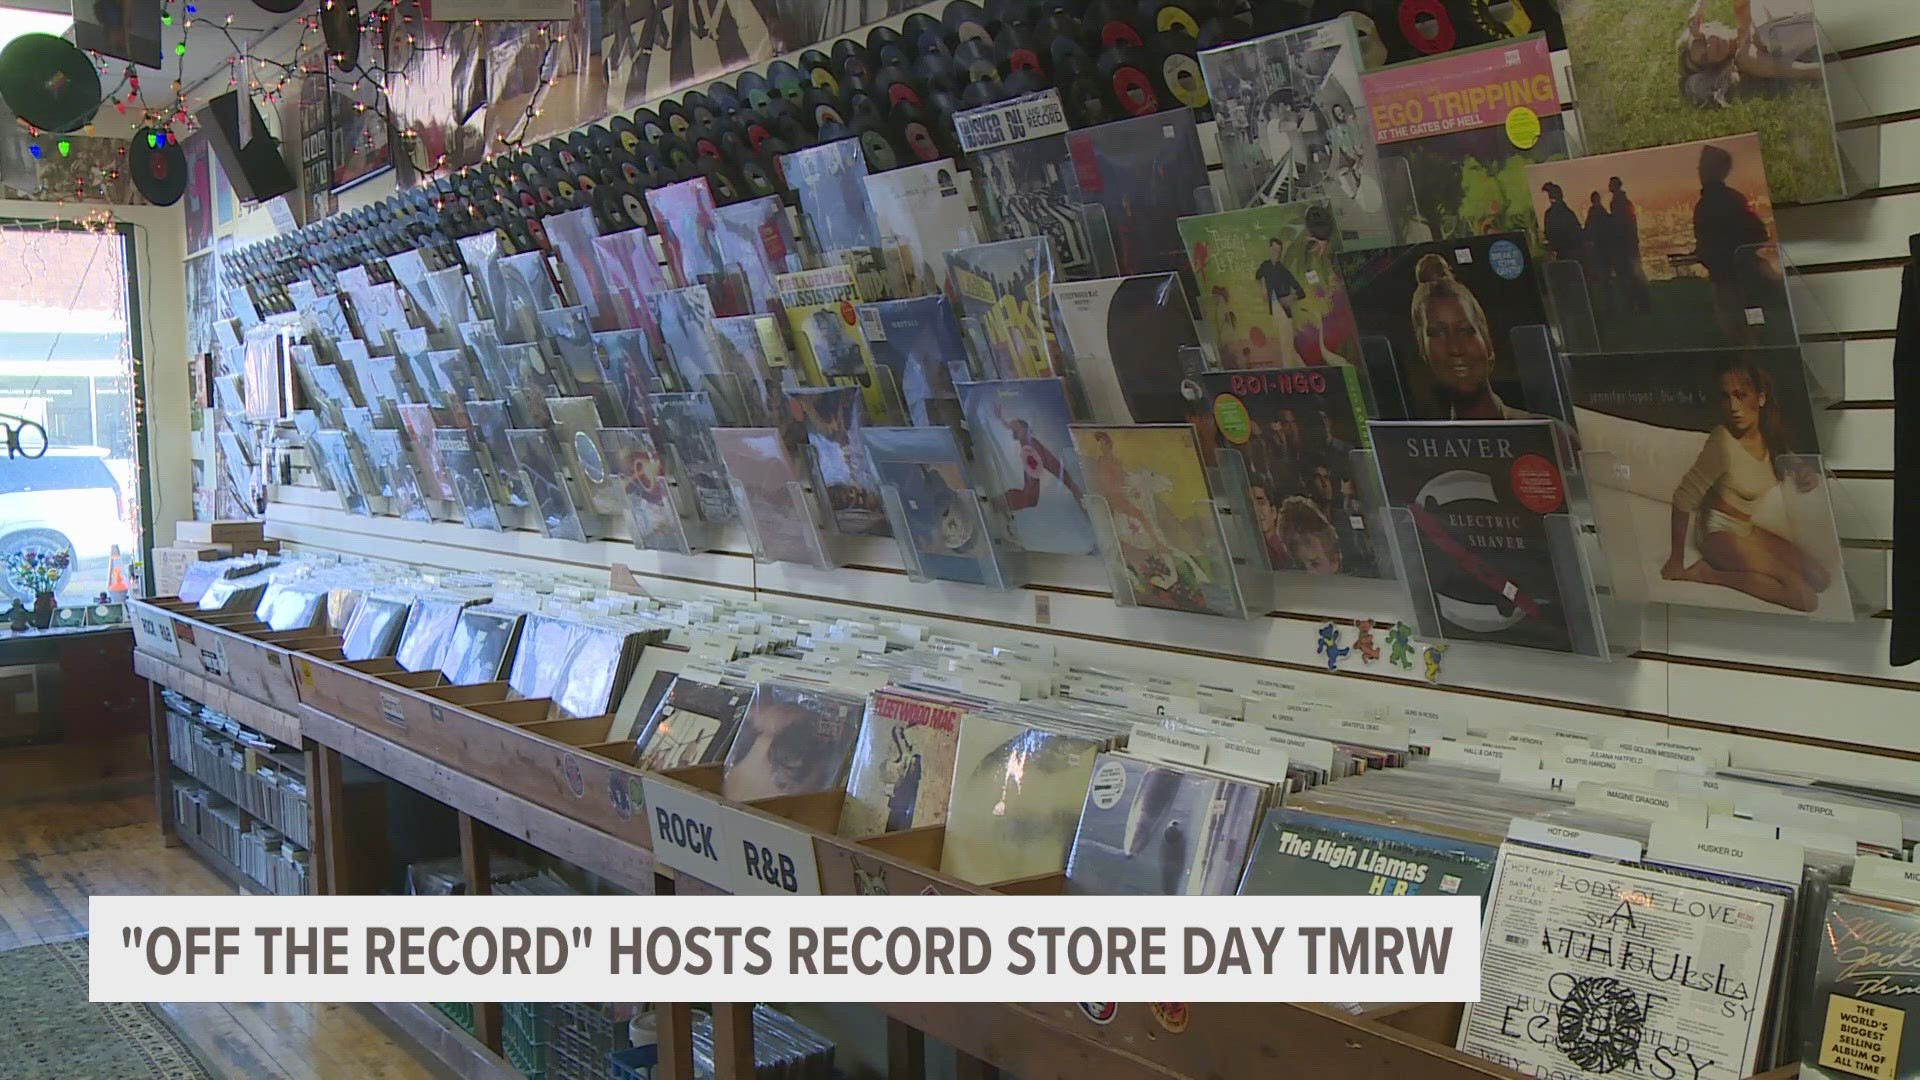 The record stores are preparing for even more crowds on Saturday, April 20 for Record Store Day.